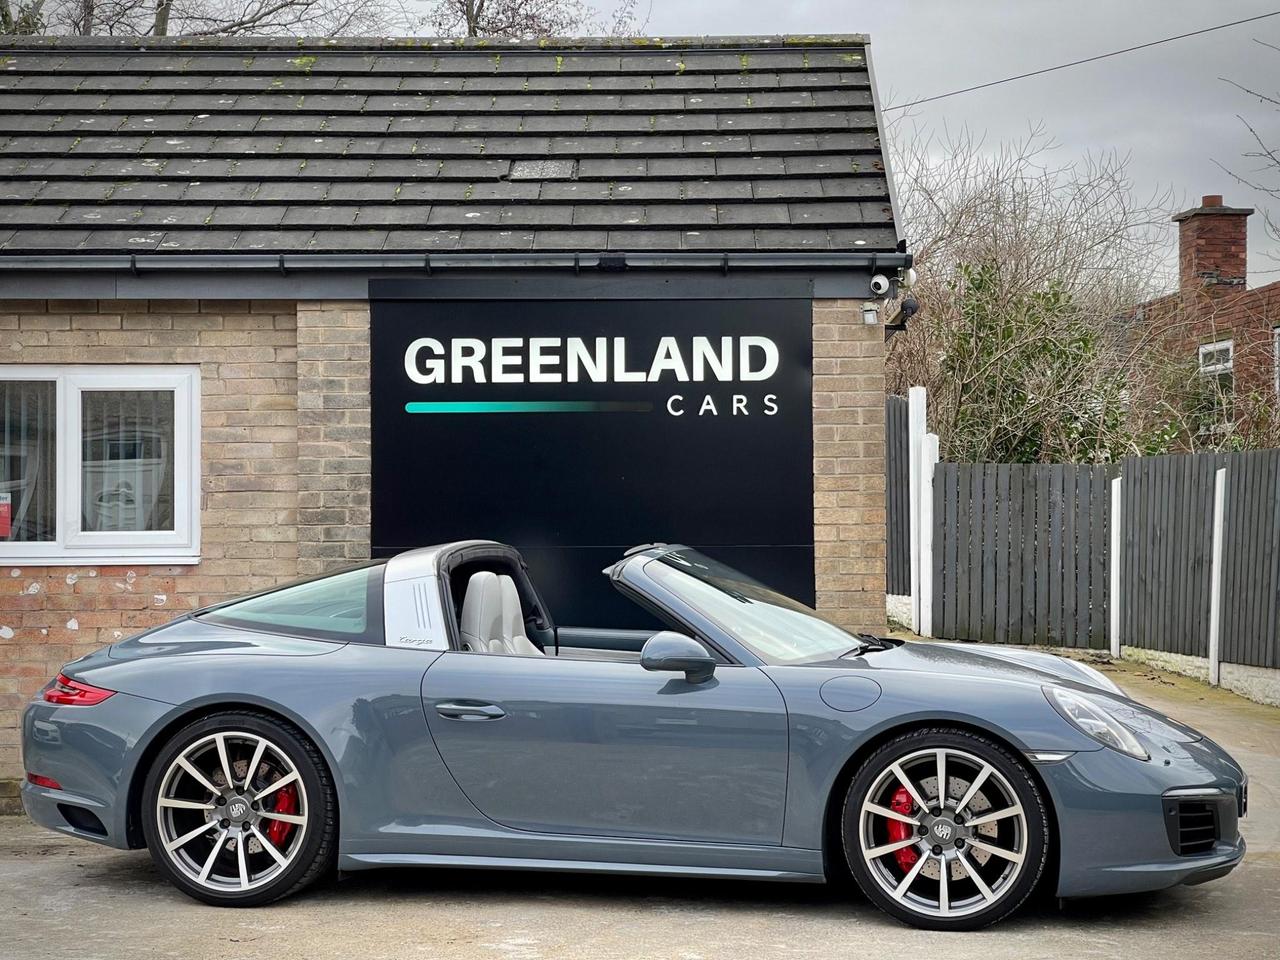 Used 2016 Porsche 911 for sale in Sheffield